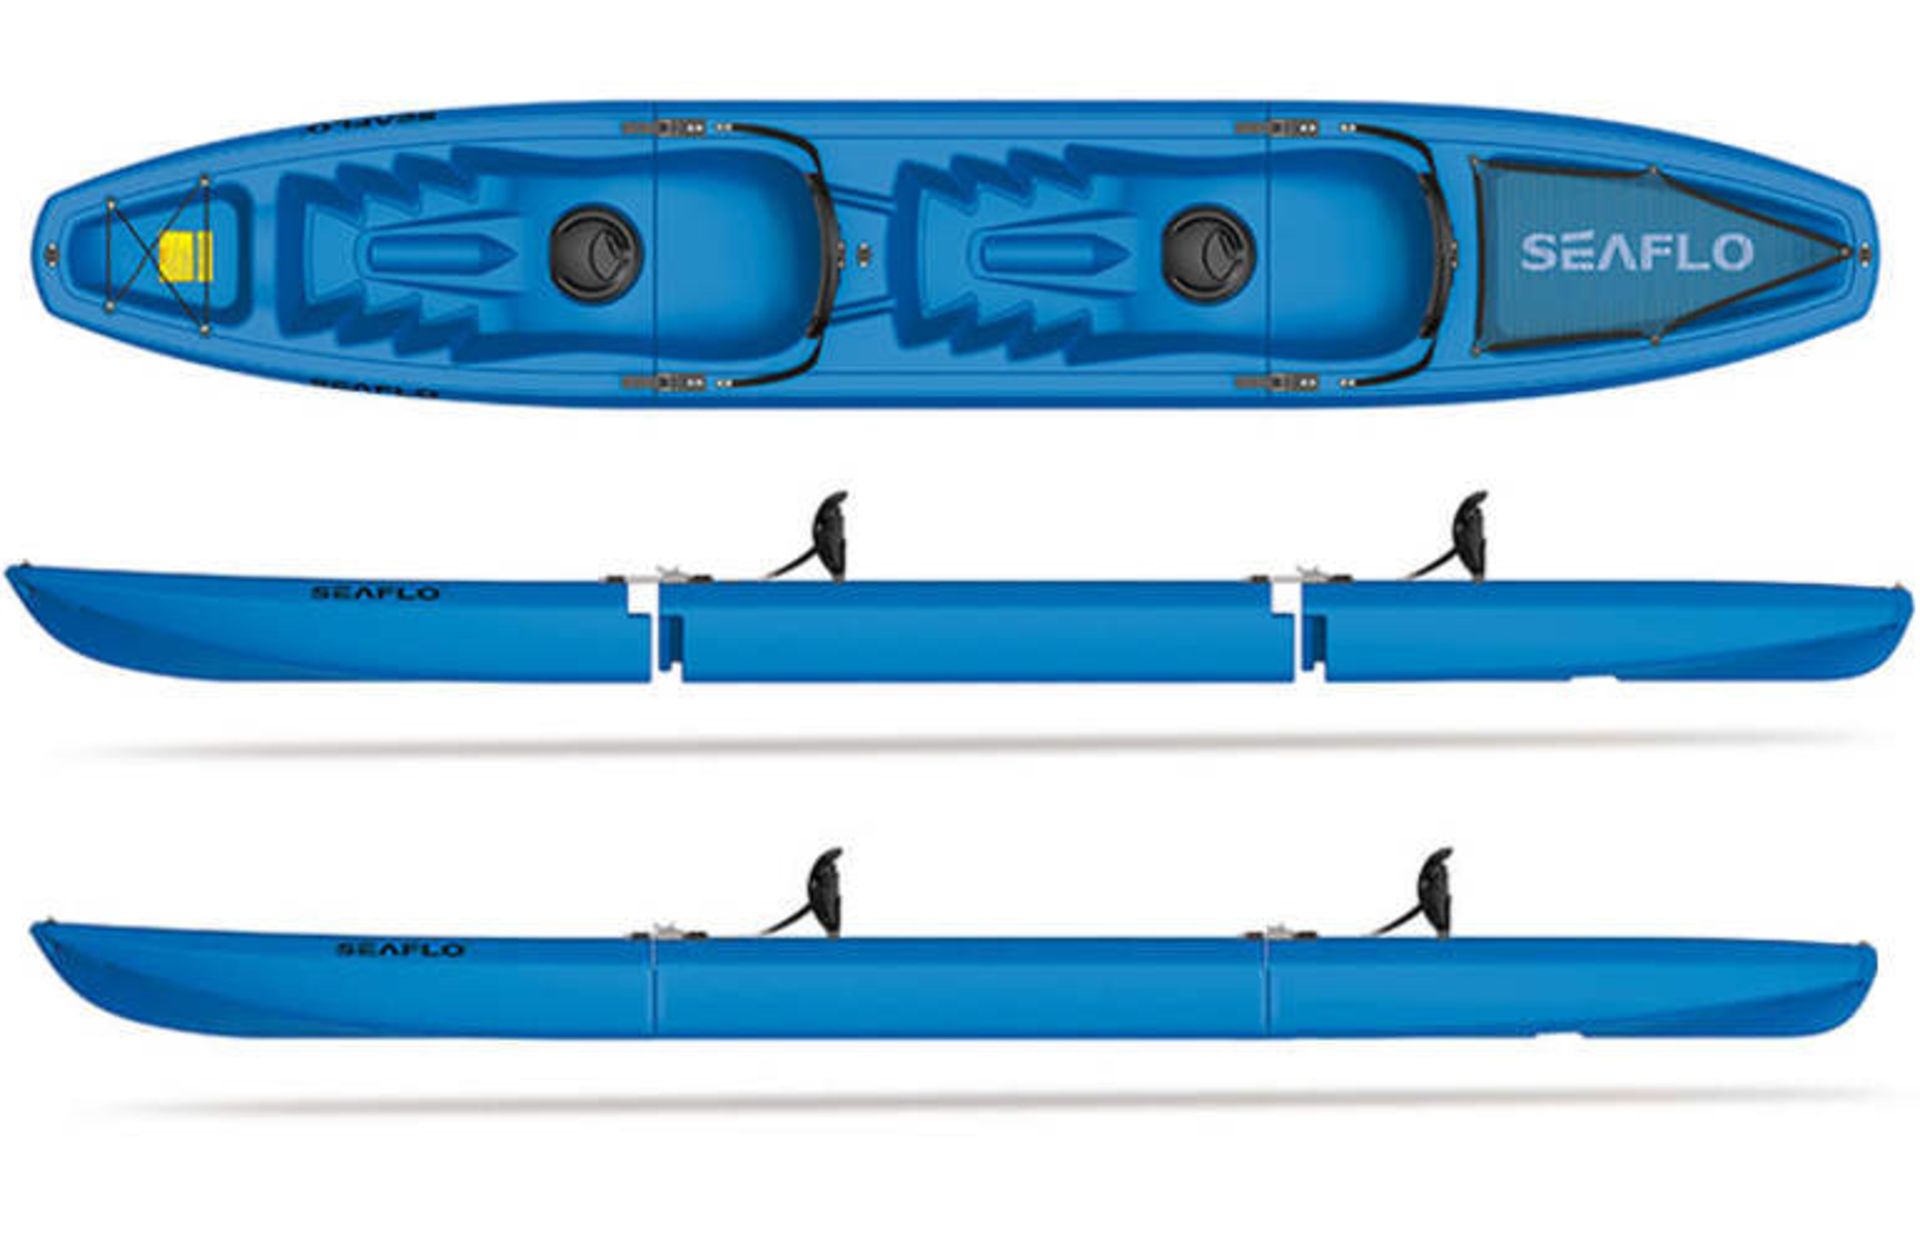 SINGLE OR 2 ADULT SIT ON 3 PIECE KAYAK - QTY: 1 A space saving kayak that is easy to transport as it - Image 2 of 2